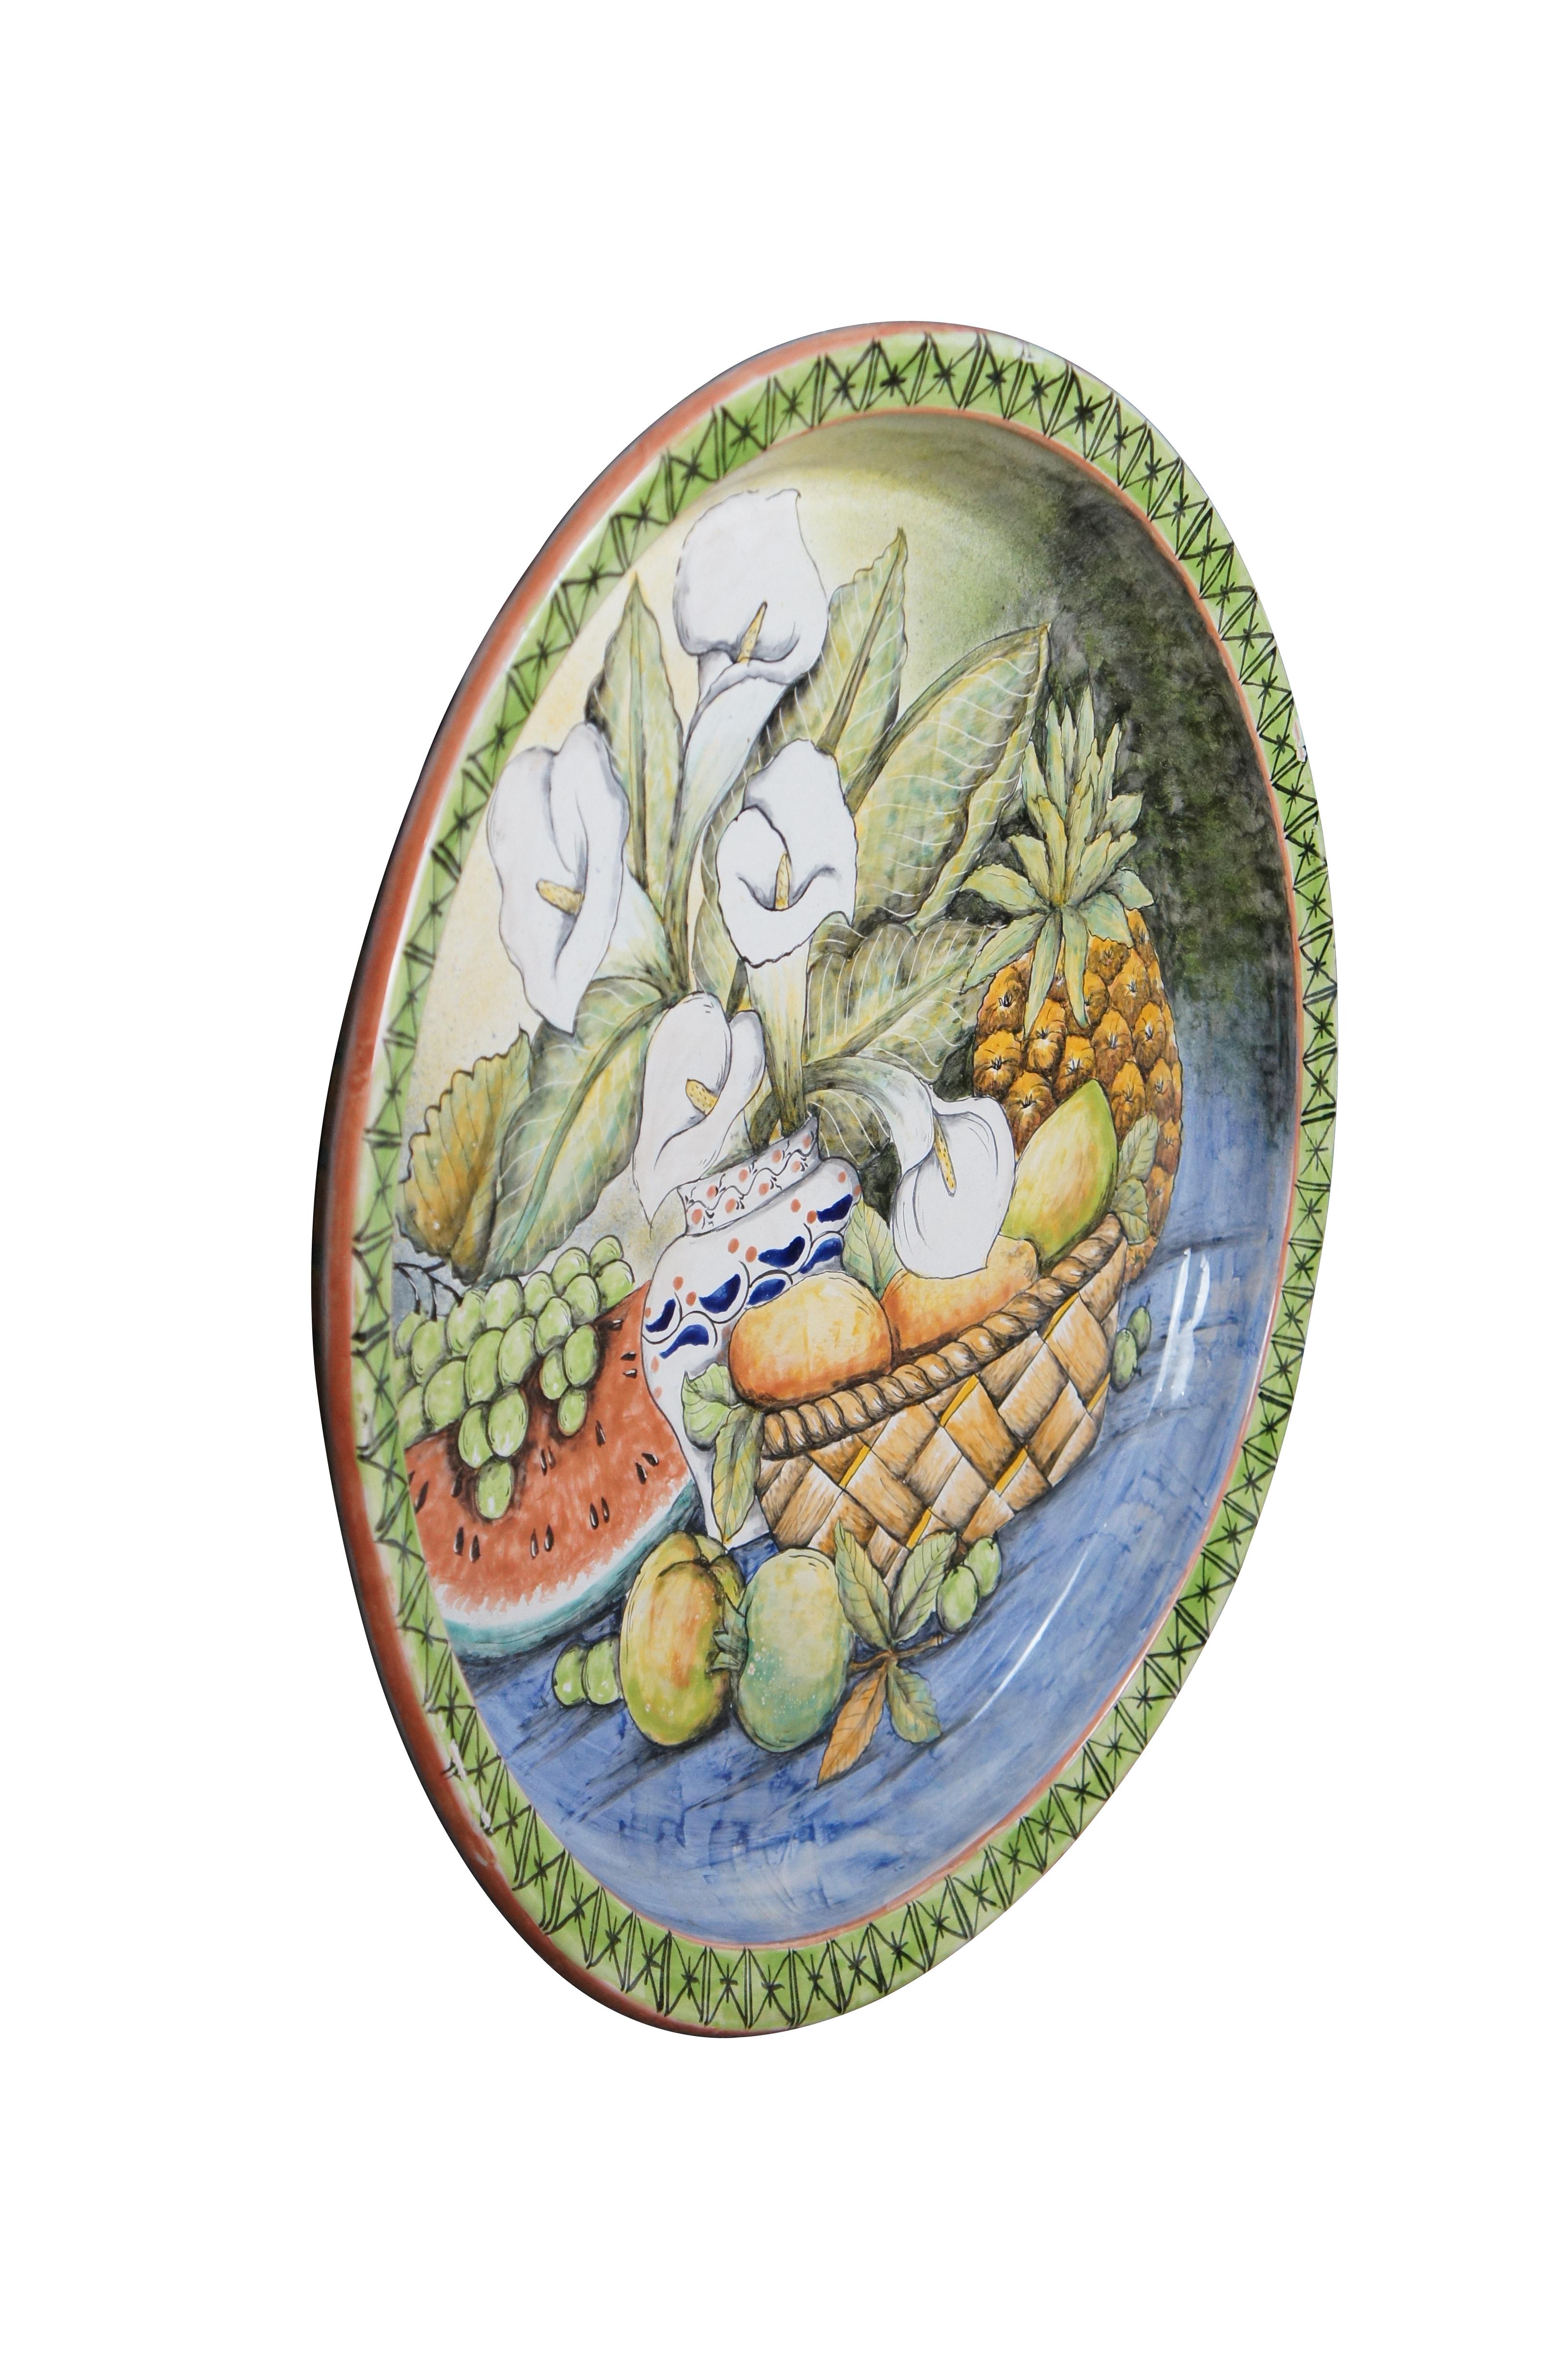 A beautiful 20th century Majolica Platter / Decorative Wall Plate. Made in Santa Rosa de Lima (Villagrán), Guanajuato. Features a hand painted still life with a basket of fruit besides a watermelon, grapes and a pineapple. In the center is a